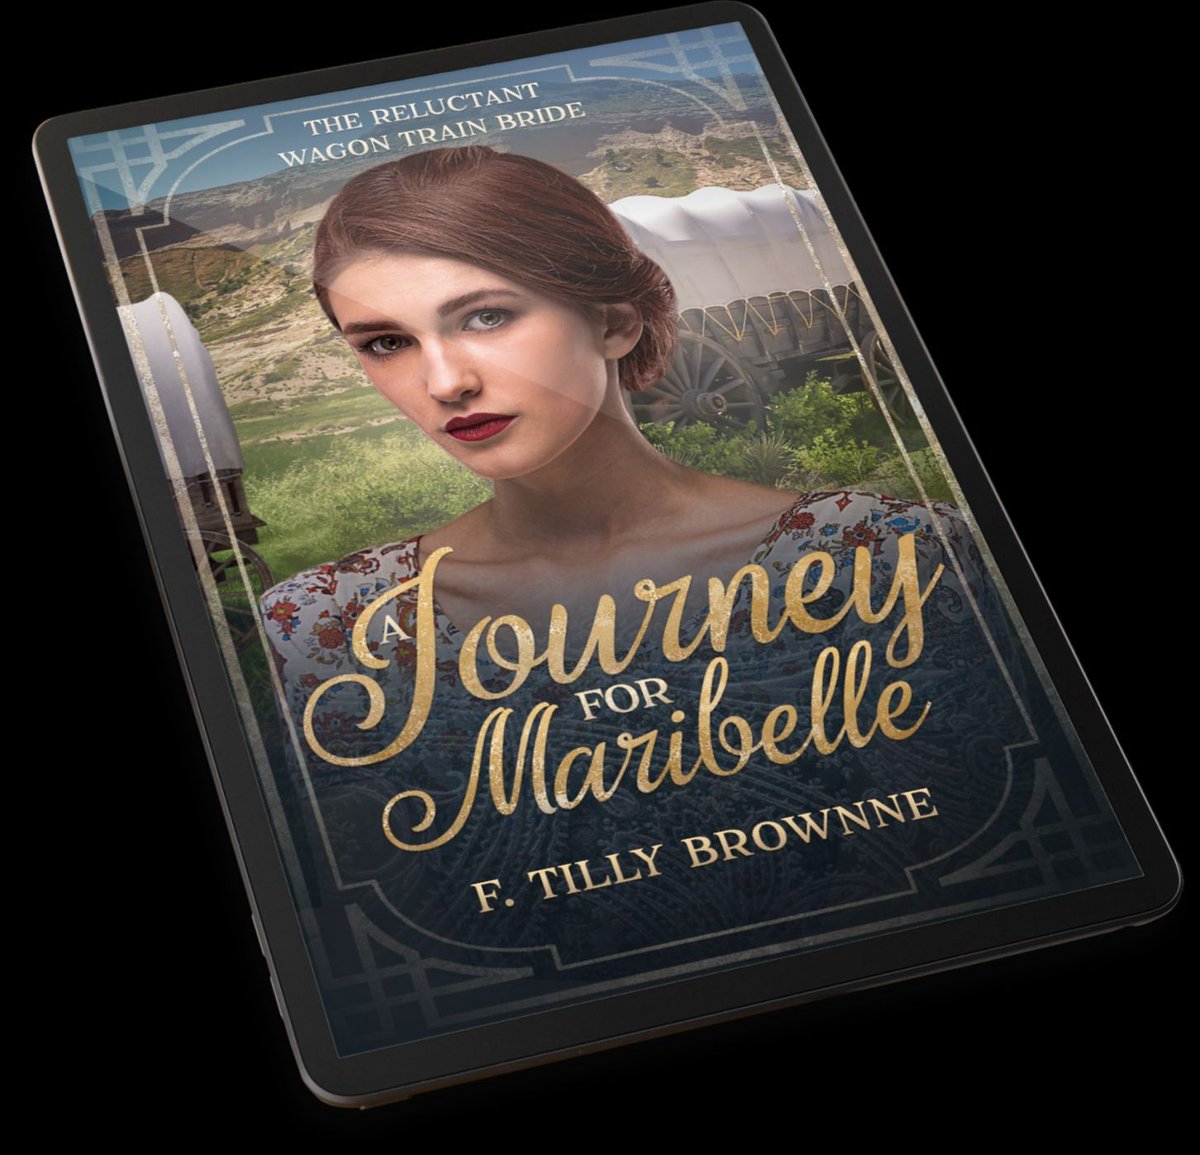 #Kindle ~ They must be married to join the #WagonTrain. She's desperate to go. Meet Annabelle's sister: Maribelle in The Reluctant Wagon Train Bride buff.ly/3rMbE8i #HistoricalRomance NEW RELEASE! #IARTG